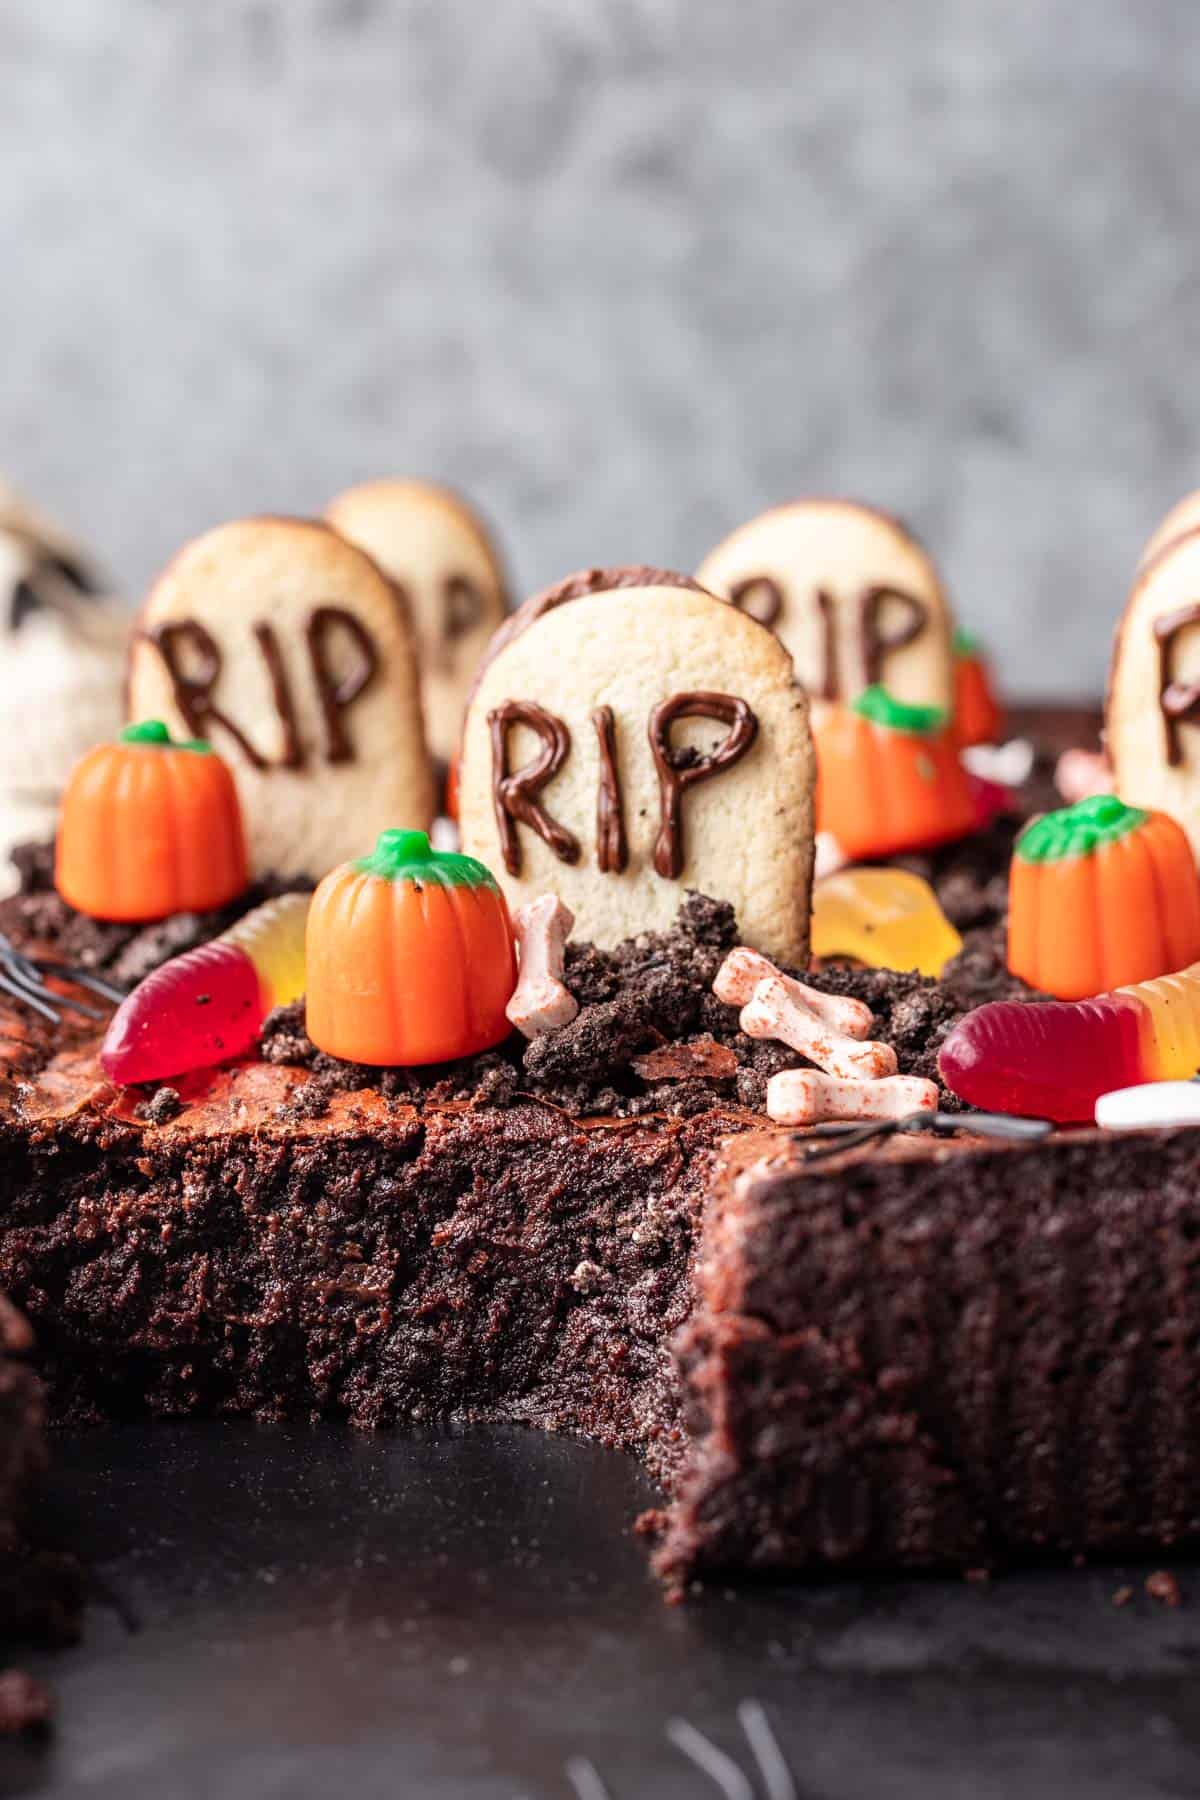 Graveyard brownies with oval cookies that look like tombstones and other Halloween candy decorations.